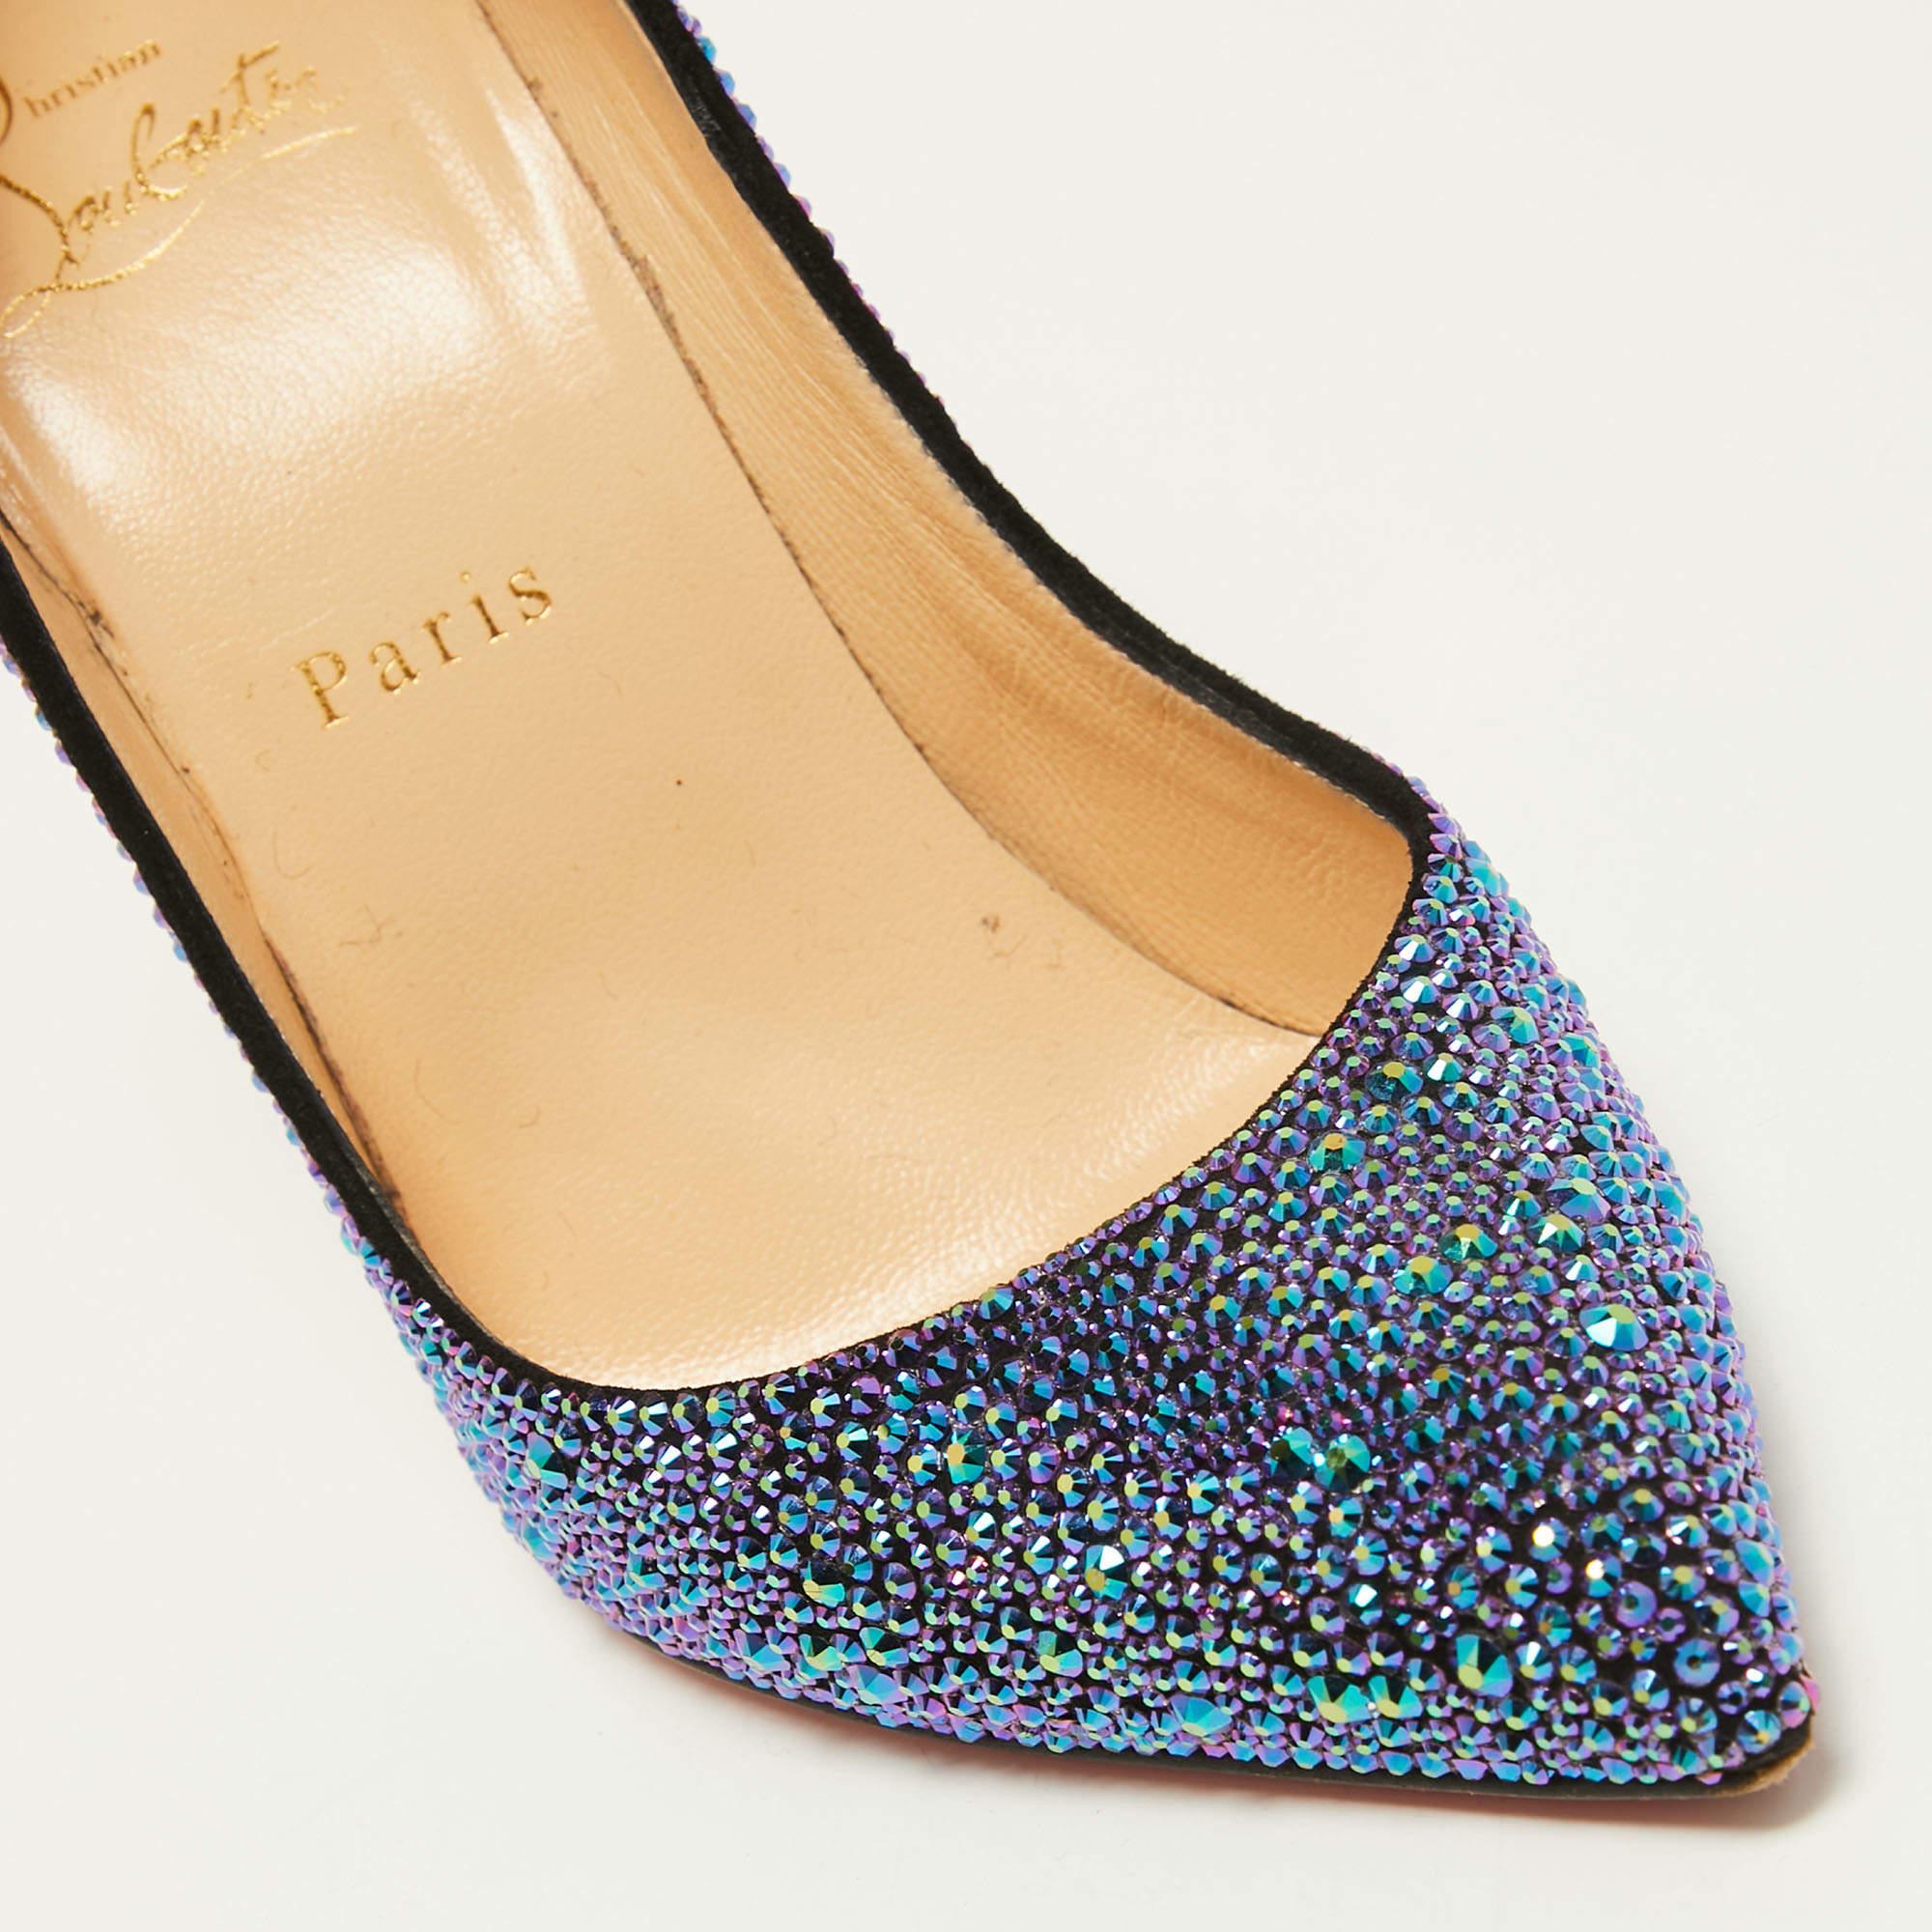 Christian Louboutin Metallic Blue Crystal Suede Pigalle Follies Pump Size 37 1